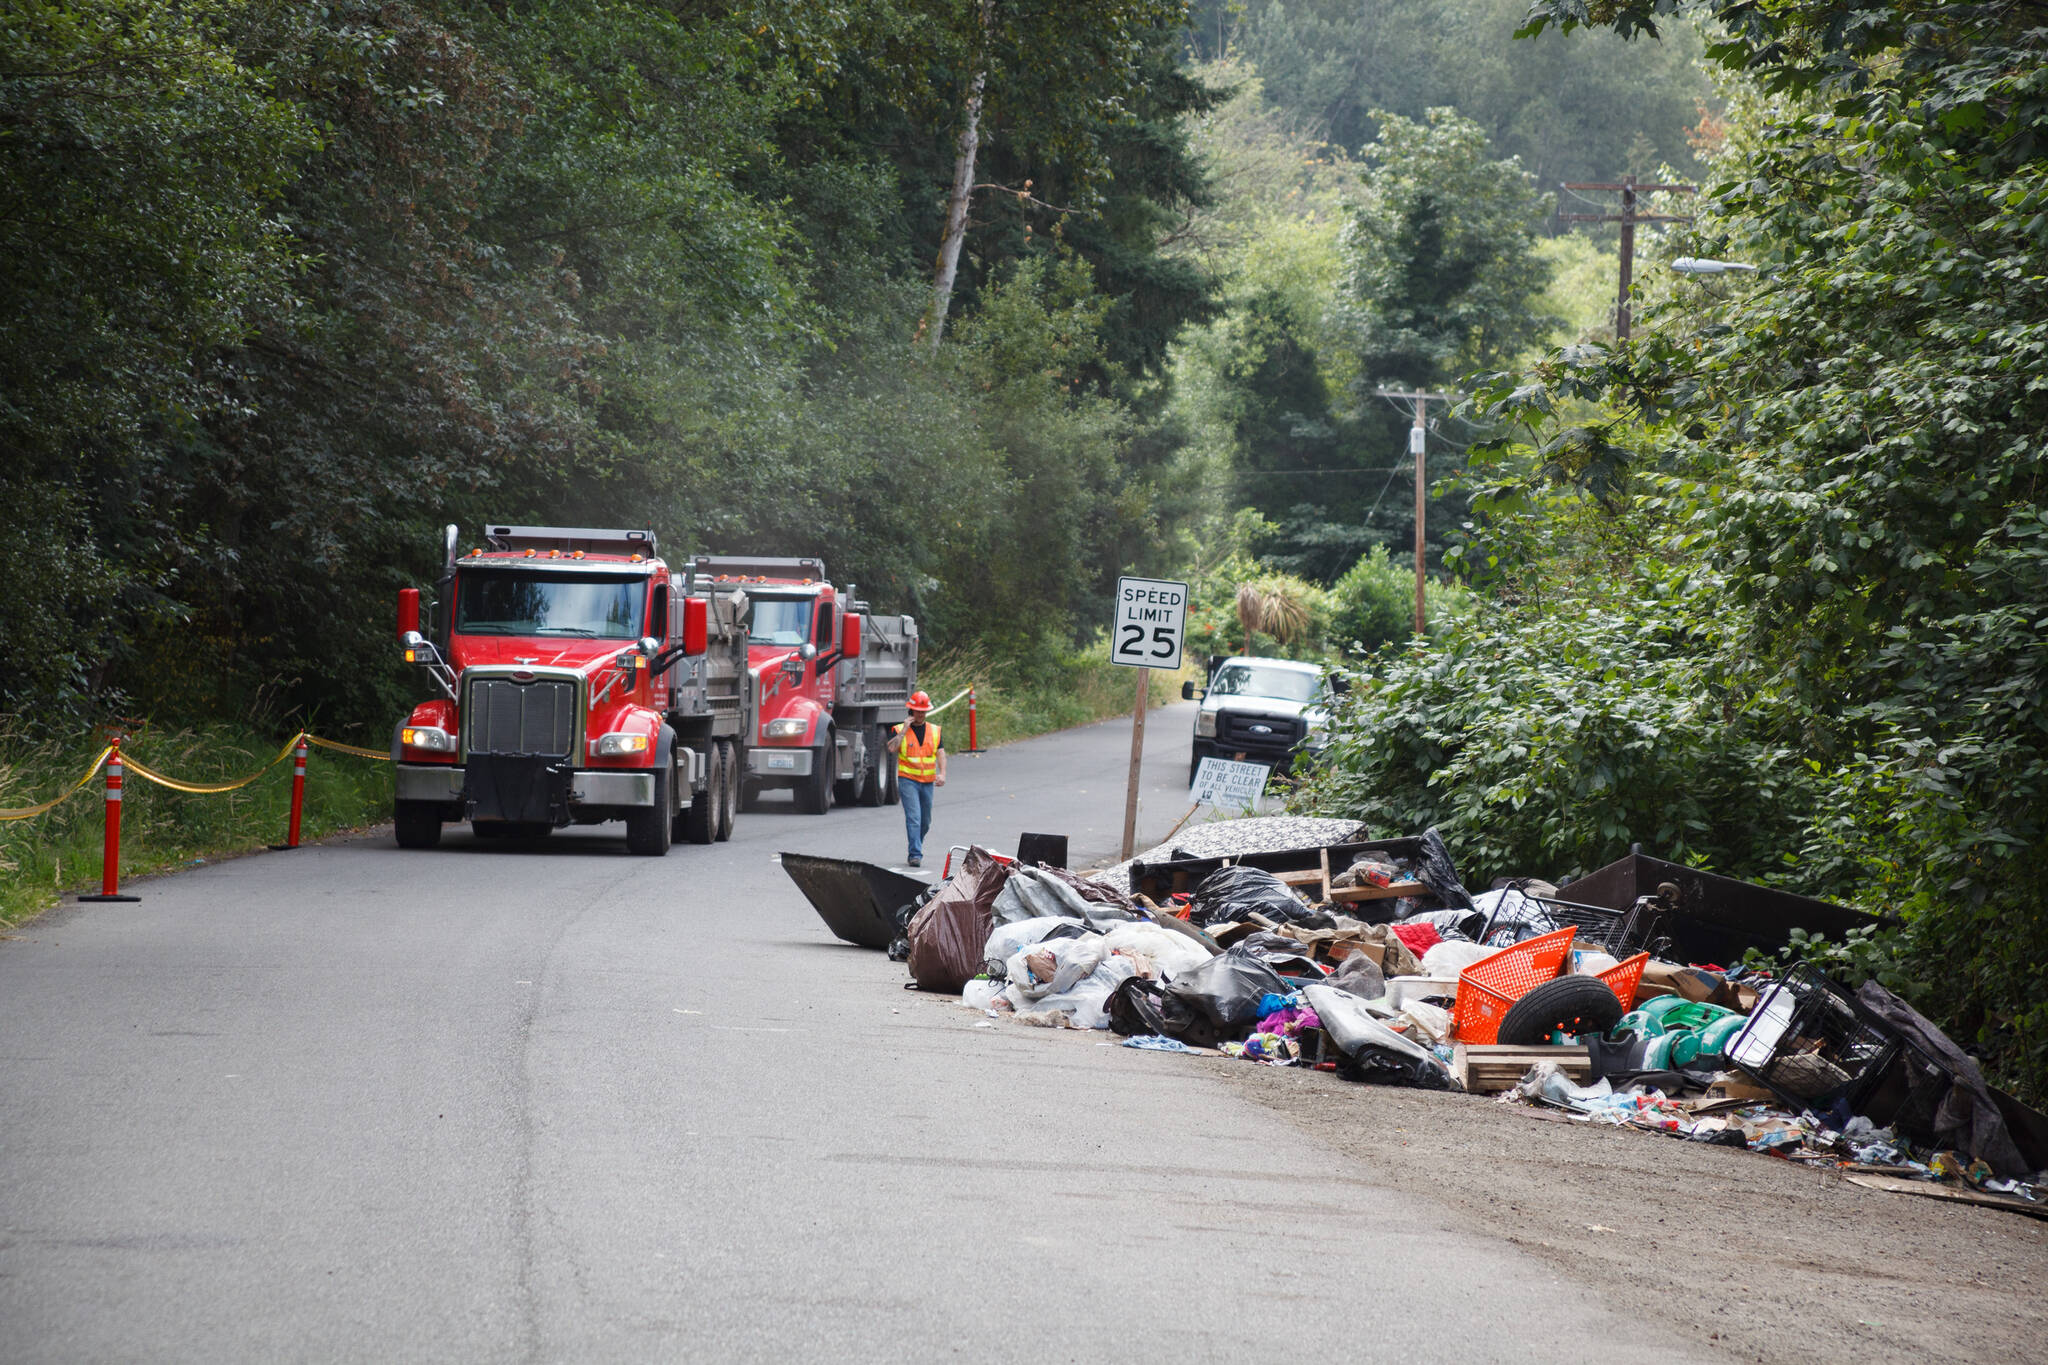 County workers cleaned trash and debris from homeless encampments and illegal dumping along the Green River Road July 13 in unincorporated King County. HENRY STEWART-WOOD, Sound Publishing